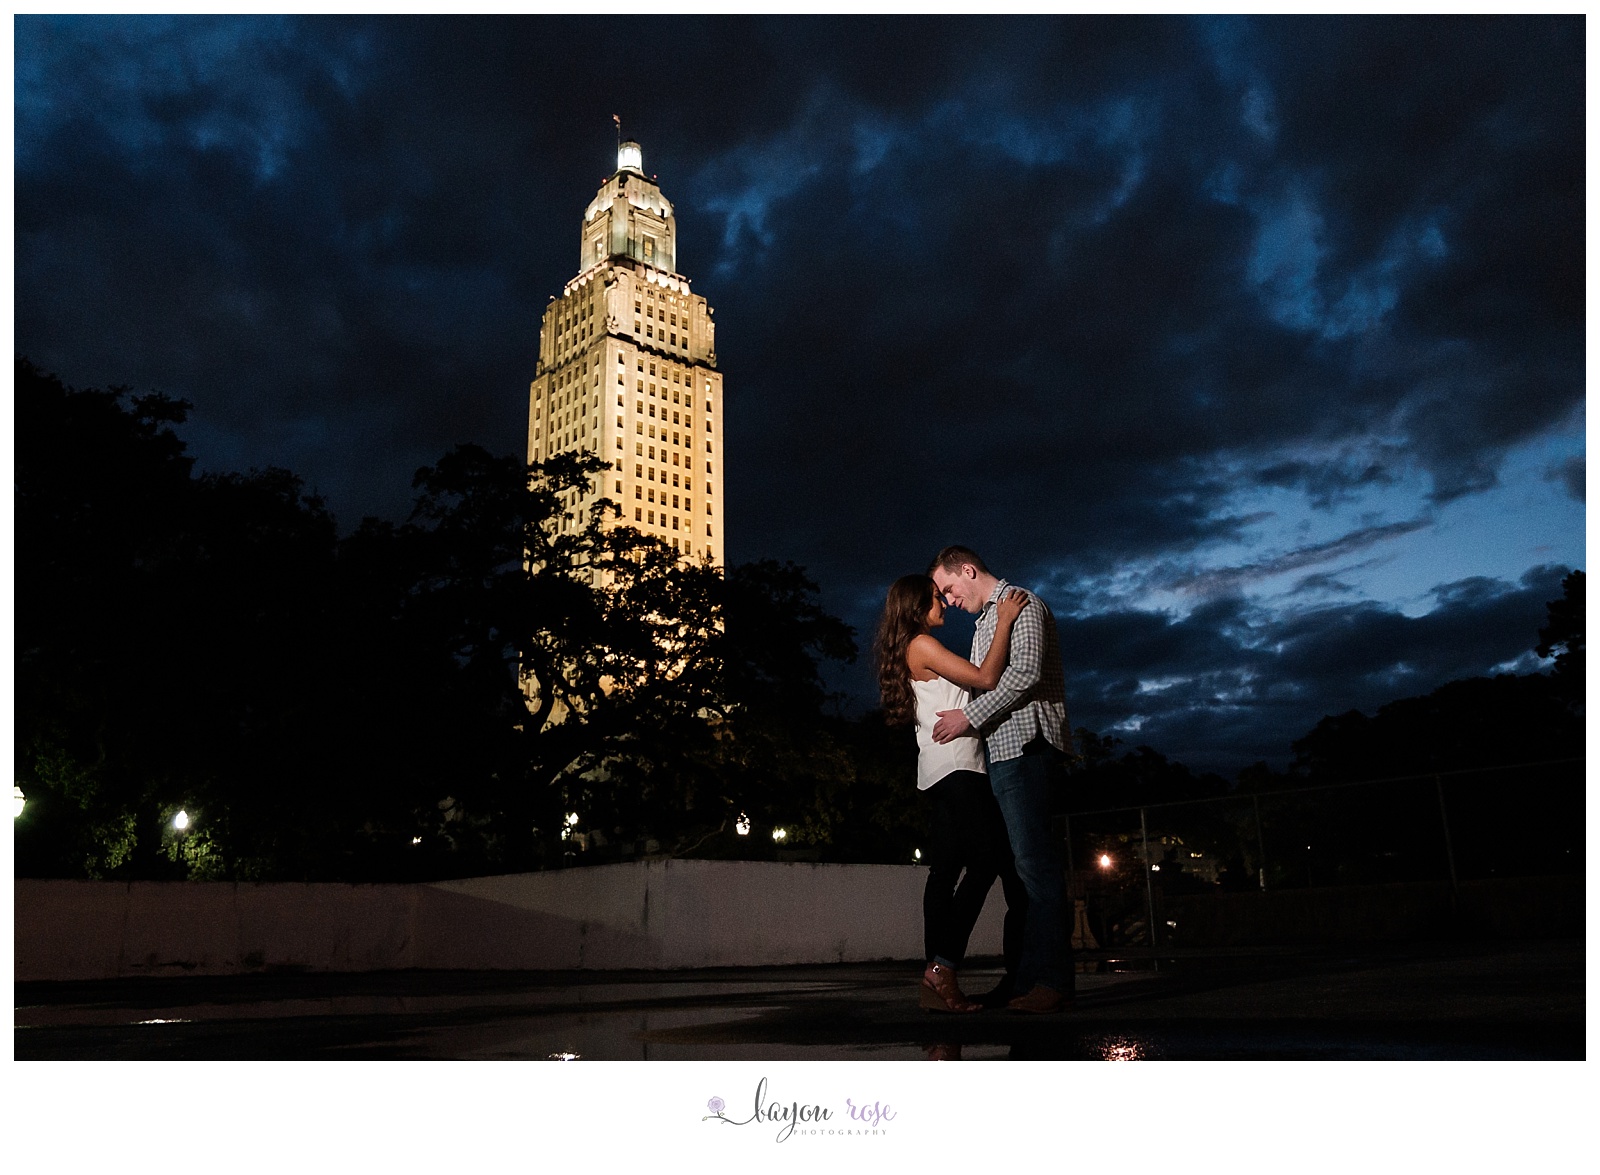 Couple against stormy sky with Baton Rouge capitol in background